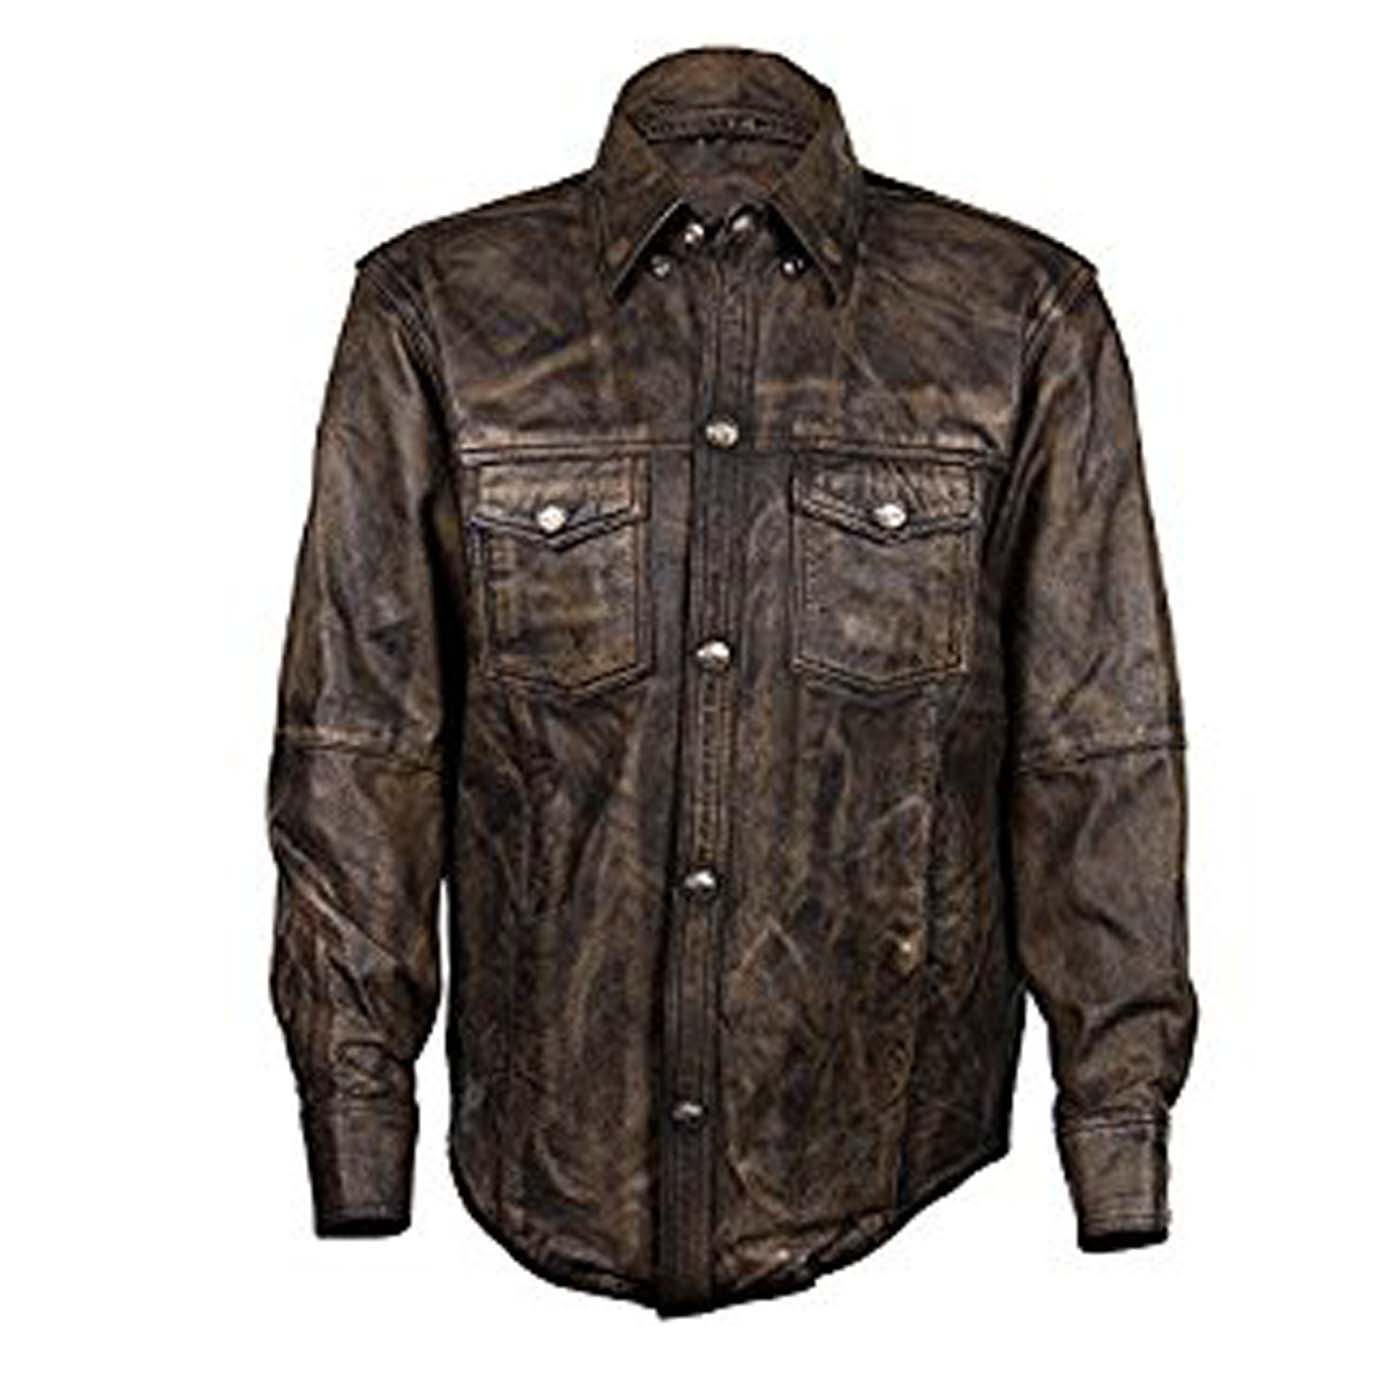 Distressed Brown Leather Shirt with Buffalo Buttons.